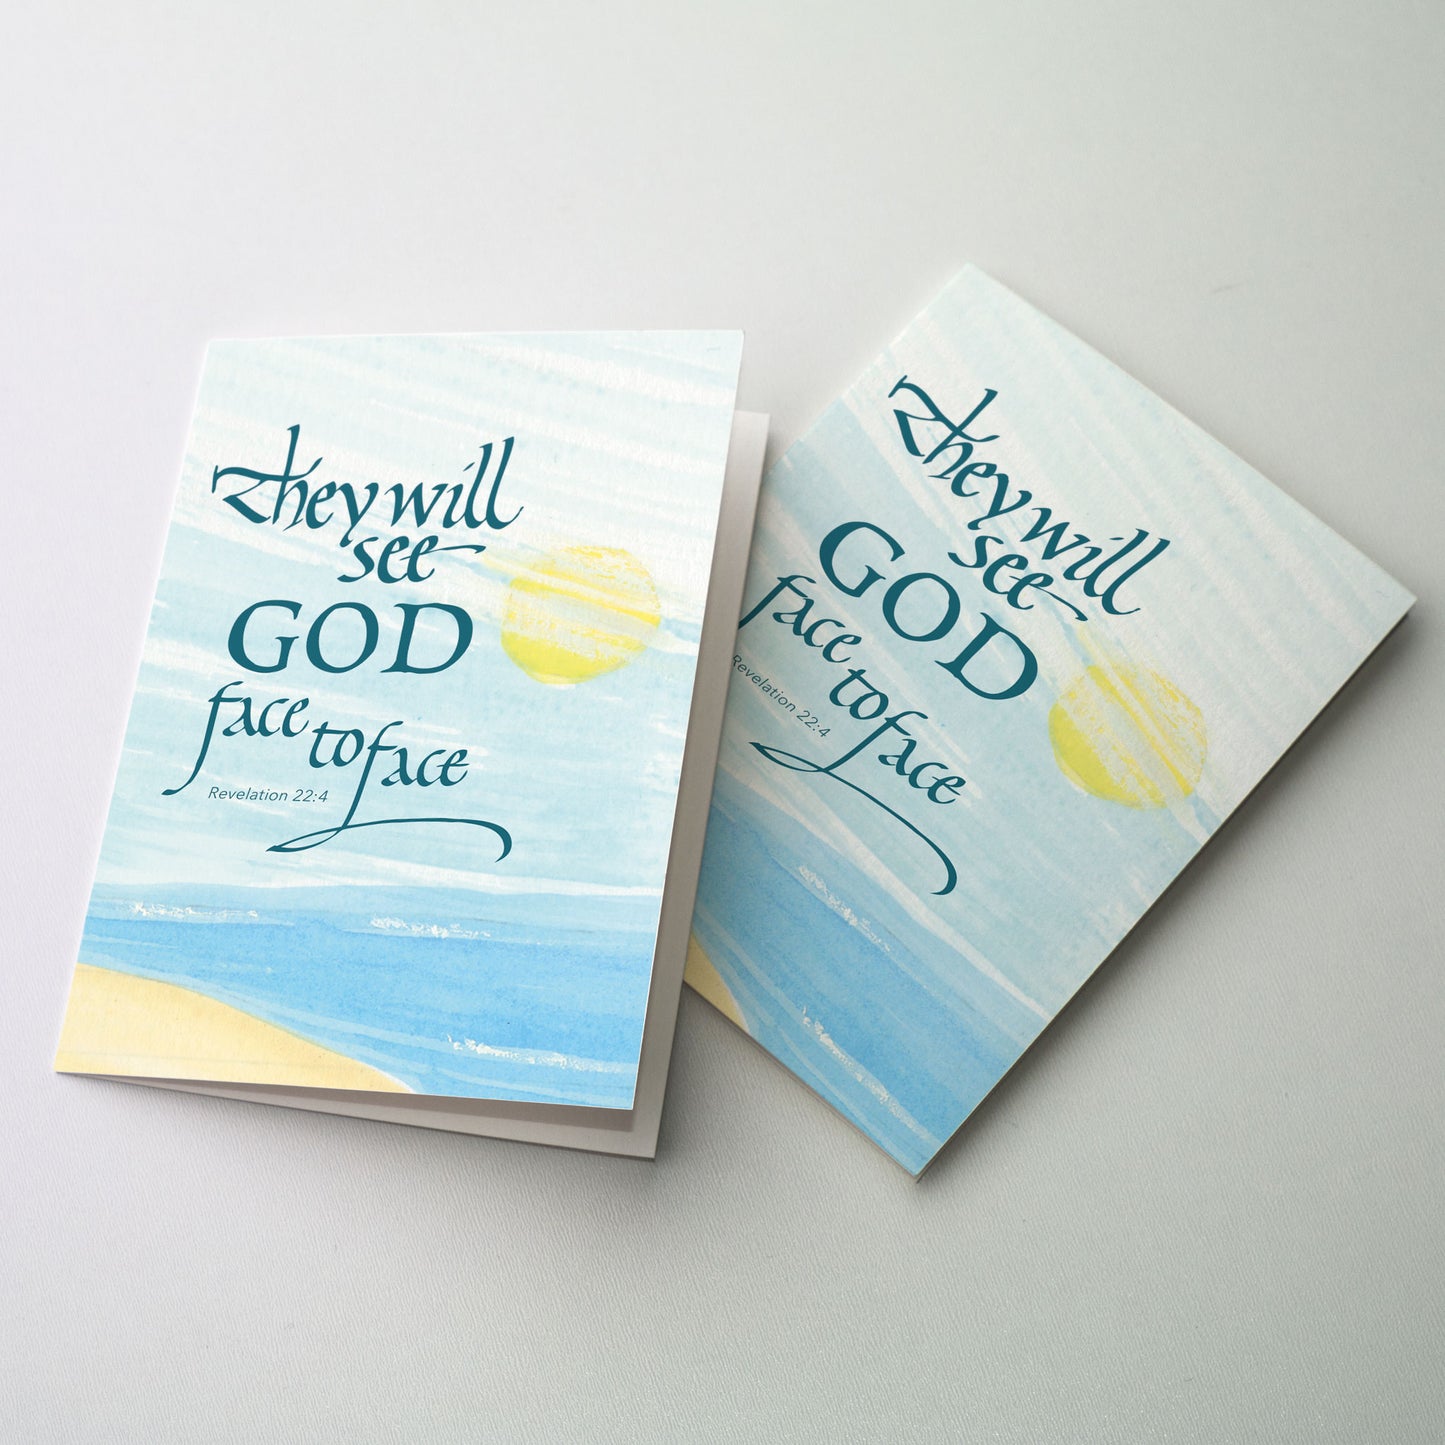 They Will See God Face to Face - Words of Comfort Sympathy card